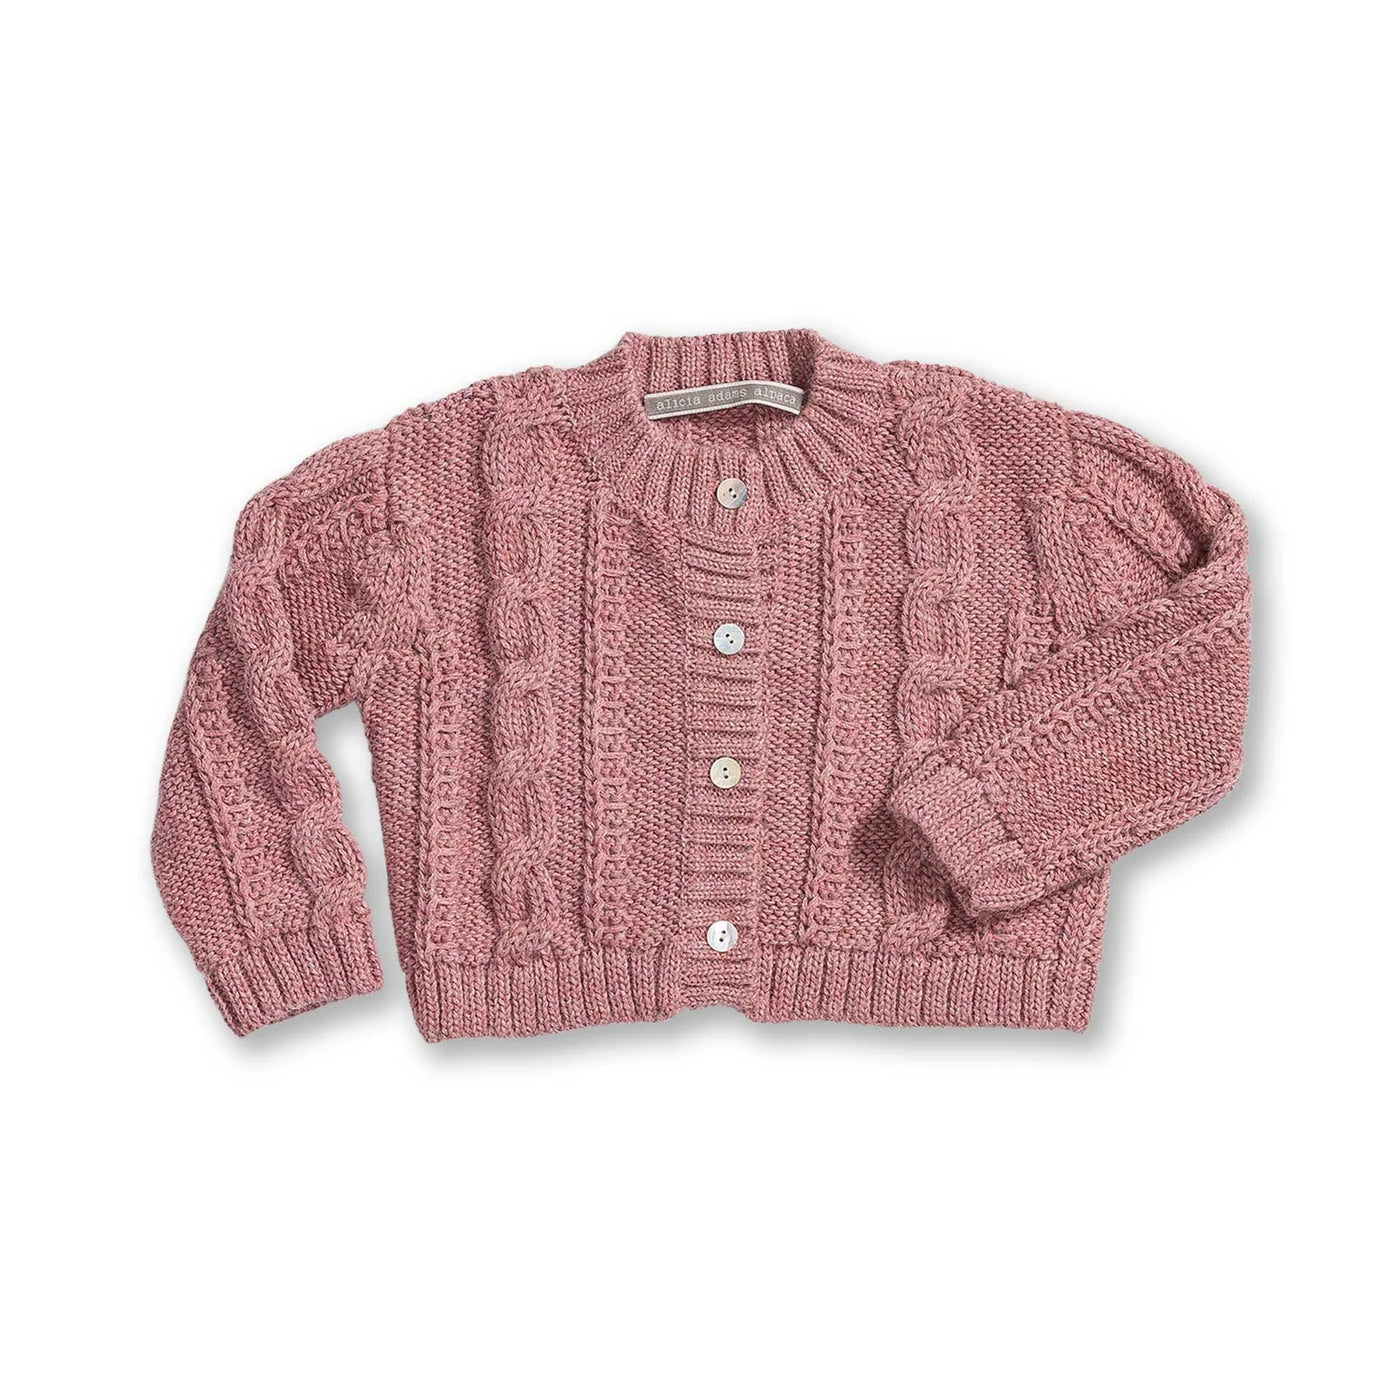 ALICIA ADAMS FAVORITE CARDIGAN BABY ALPACA (Available in Sizes and Colors)